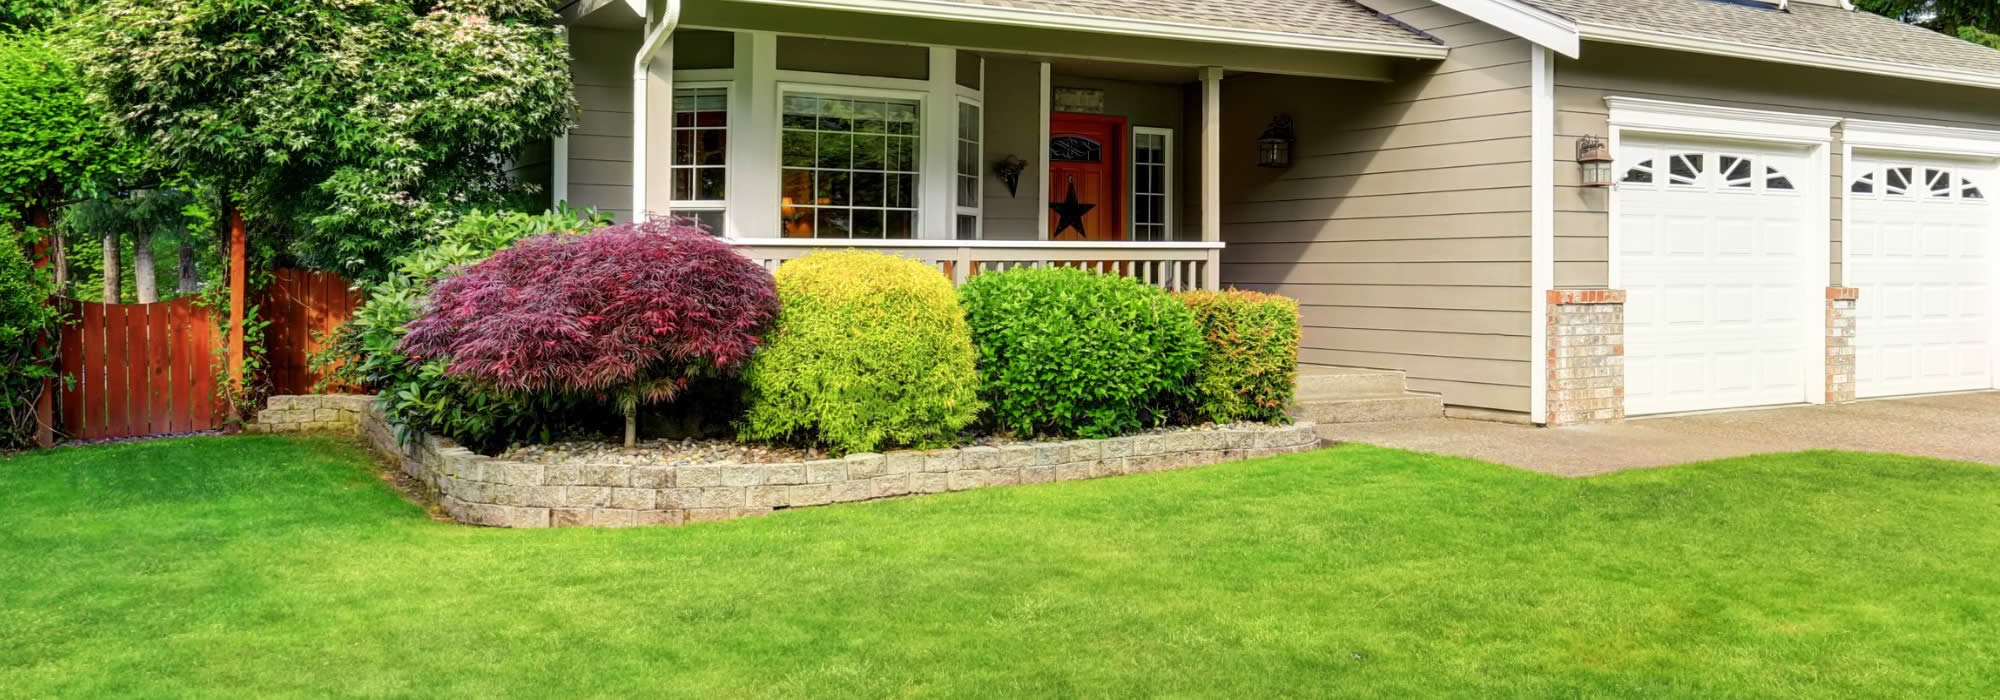 Landscaping Services in Stoughton